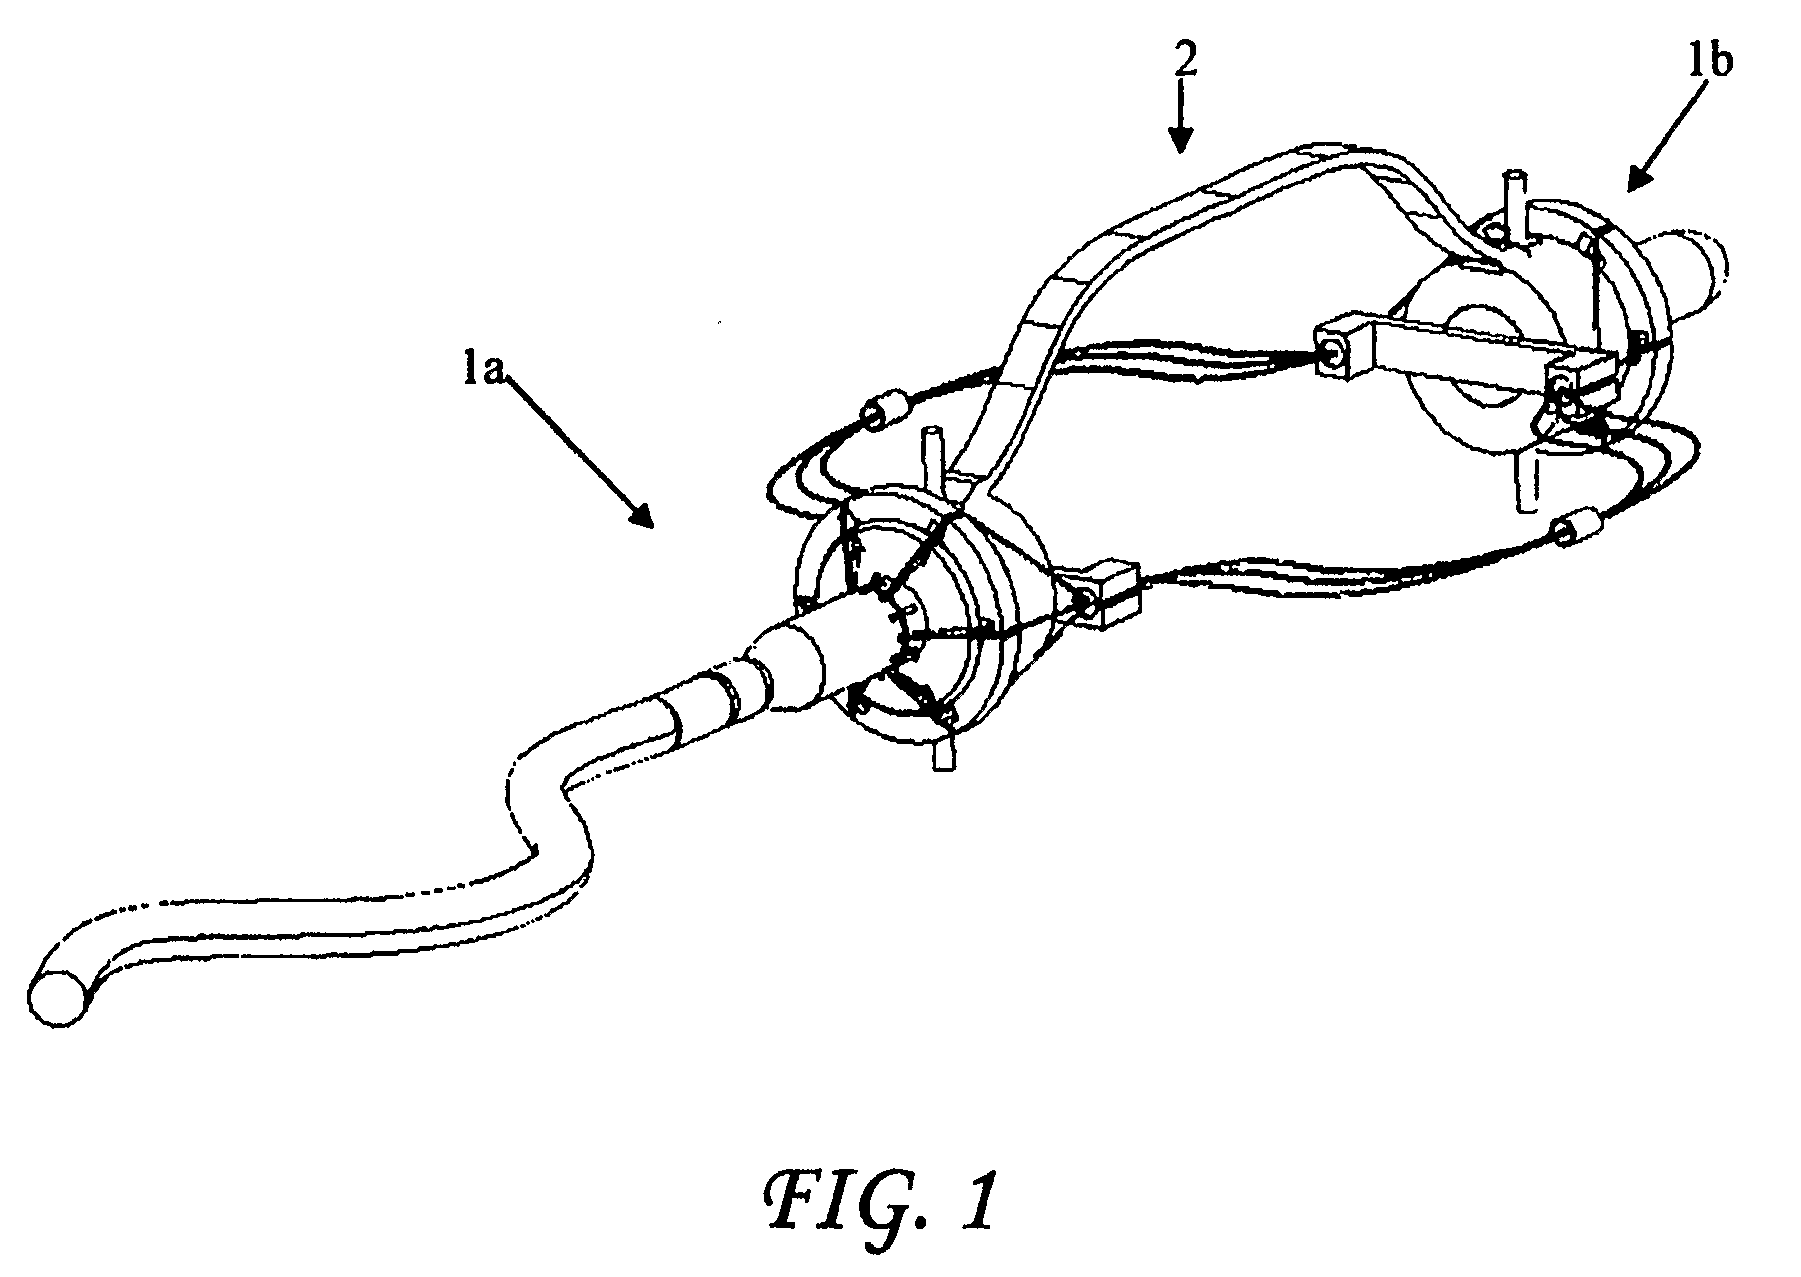 Assisted Apparatus for Anastomosis and Method Thereby of Reconnecting the Urethra to the Bladder After Removal of the Prostate During a Prostatectomy